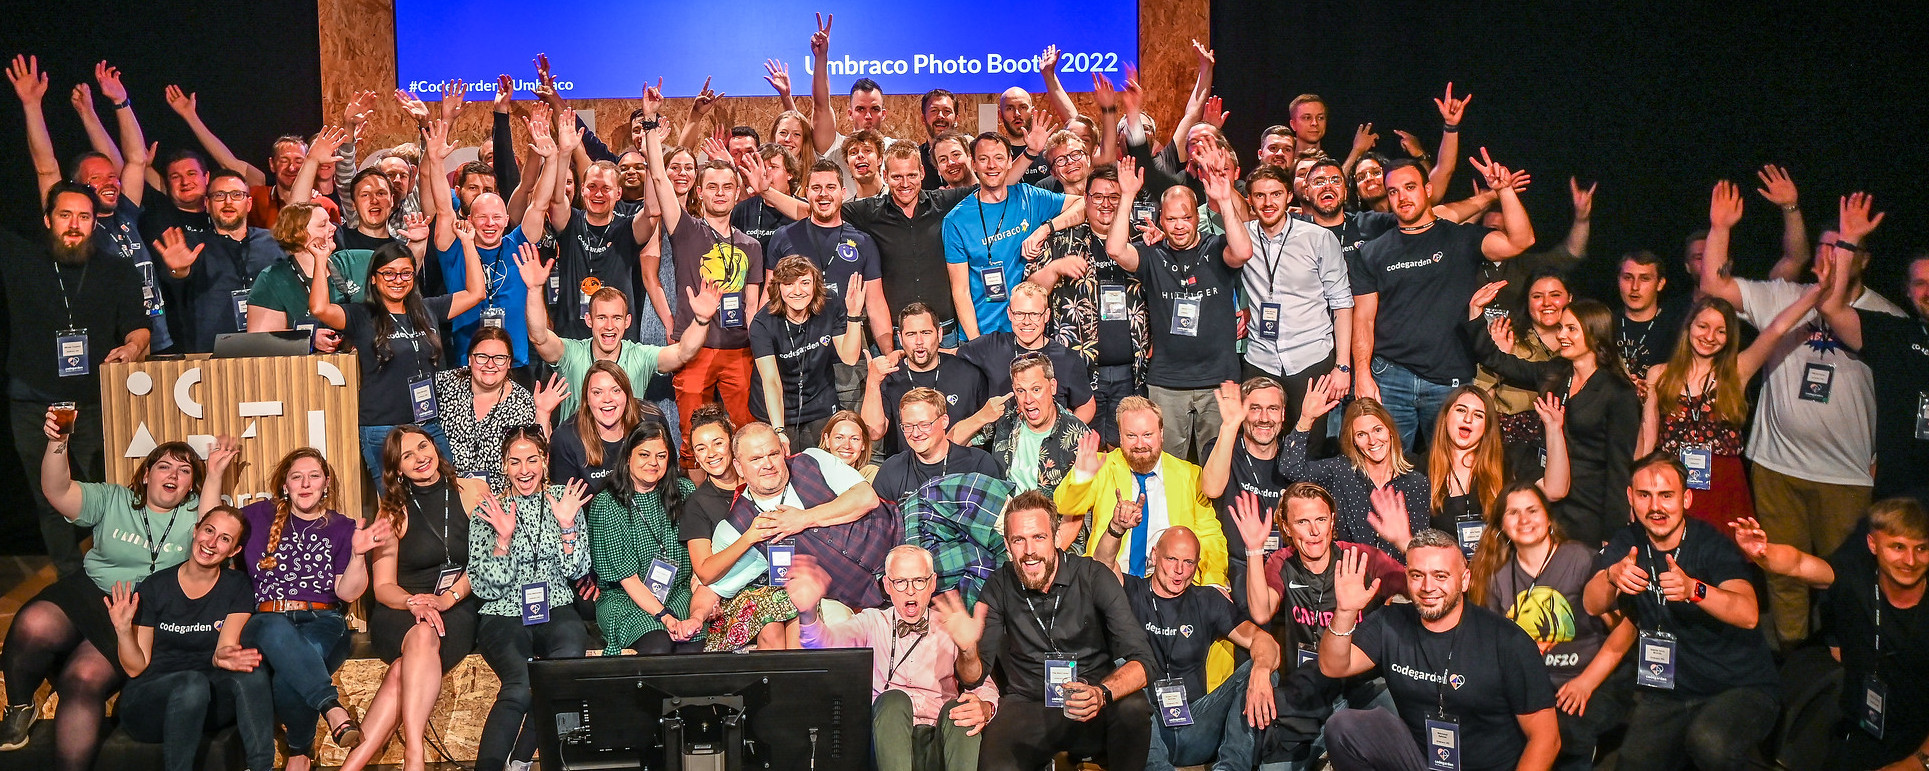 A group photo of HQ employees from Codegarden 2022. They have their hands raised in the air and are smiling and cheering.